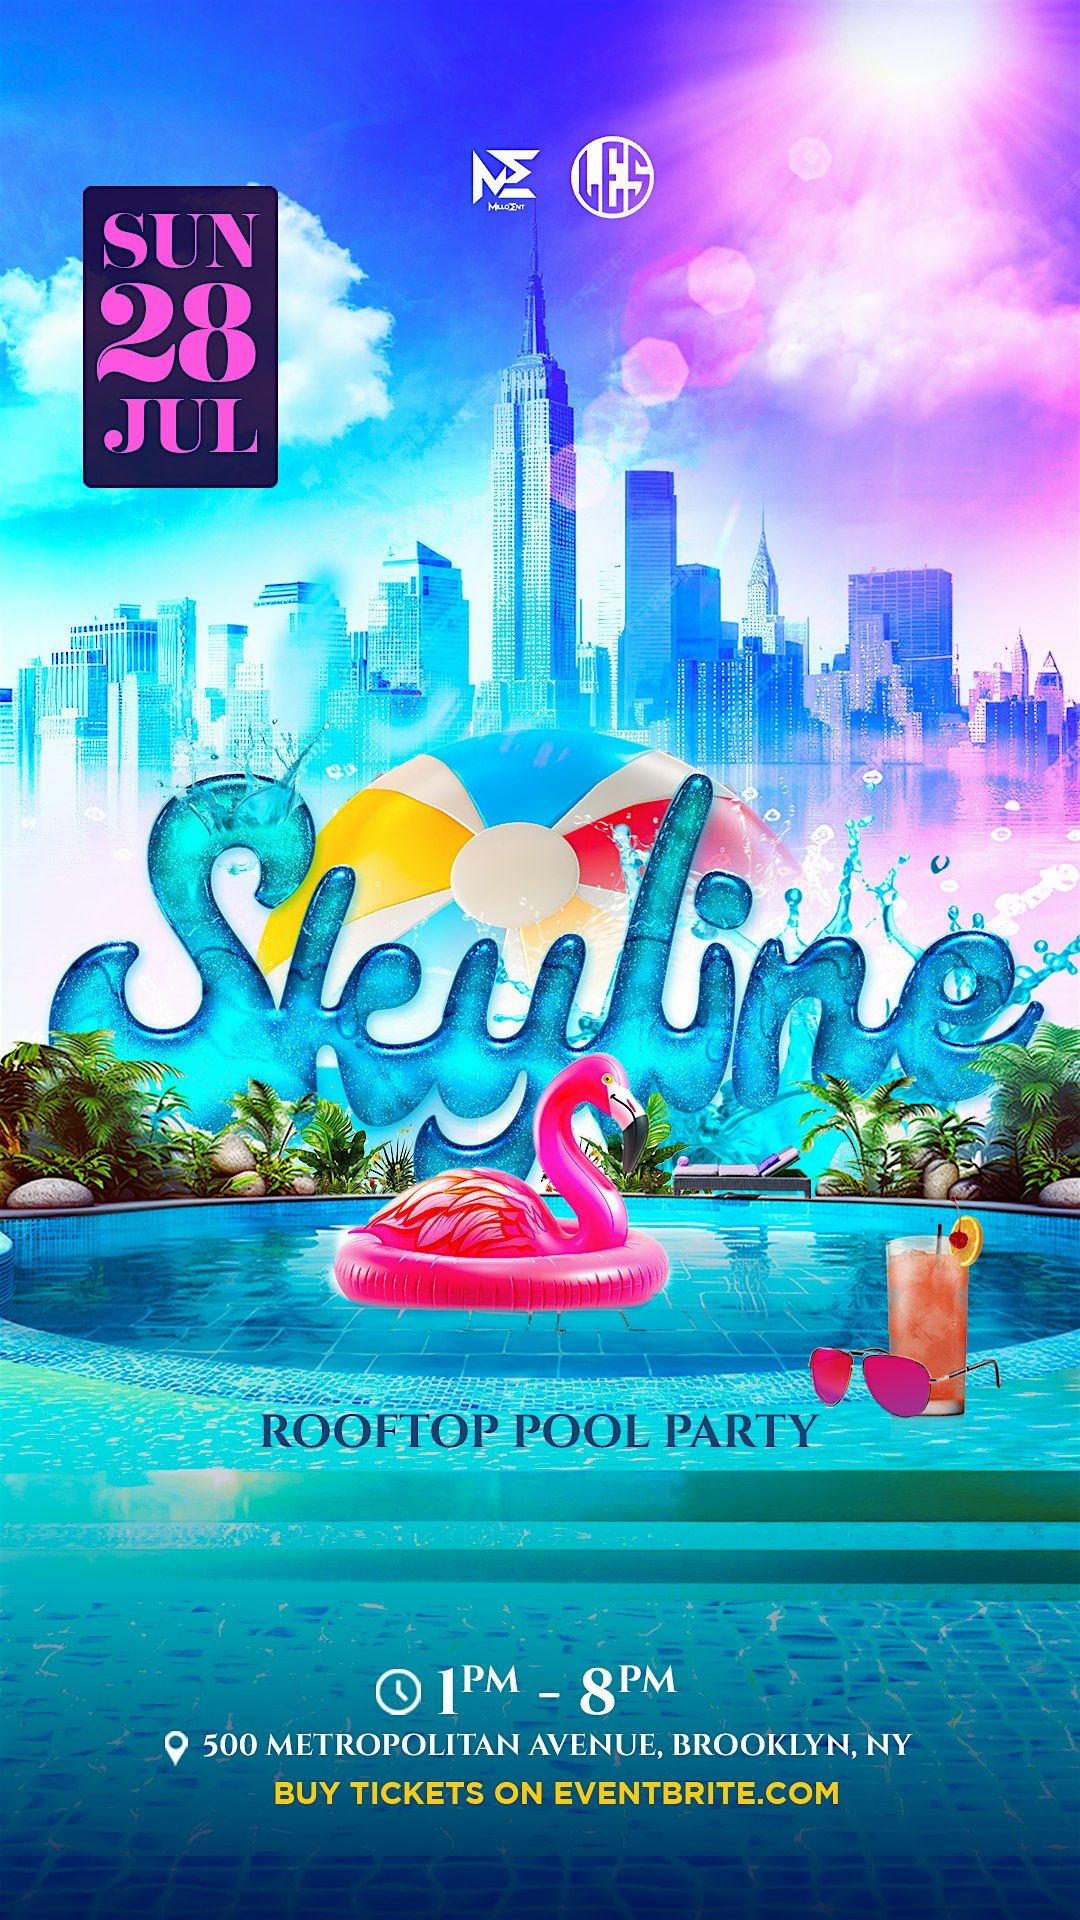 Skyline RoofTop Pool Party